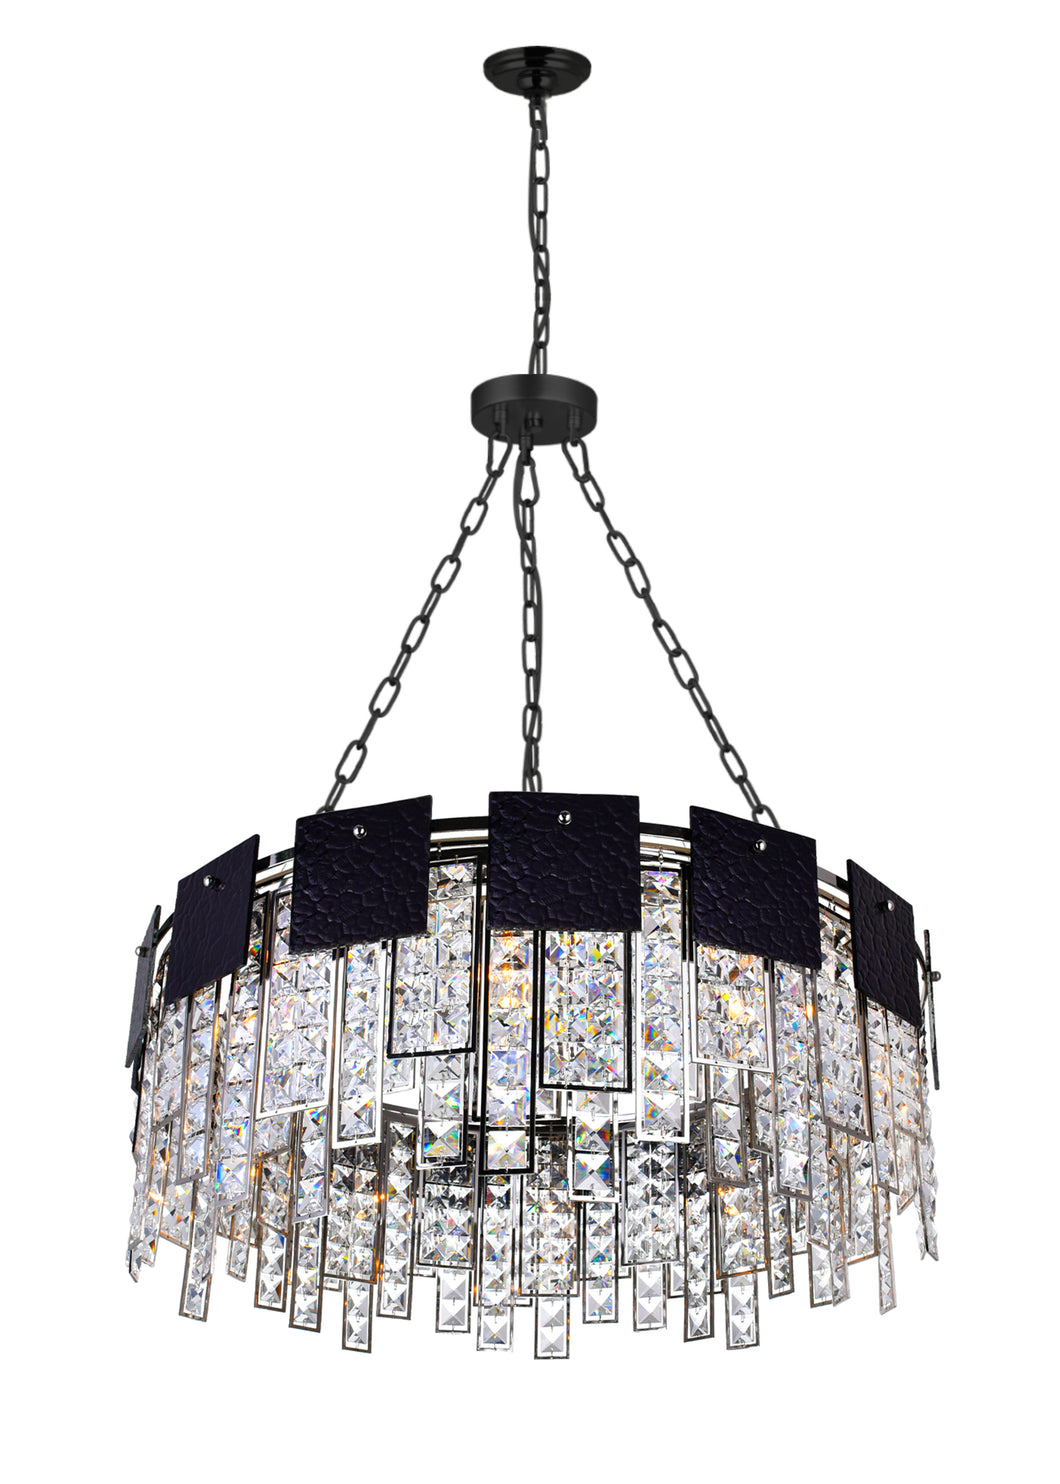 10 Light Down Chandelier with Polished Nickel Finish